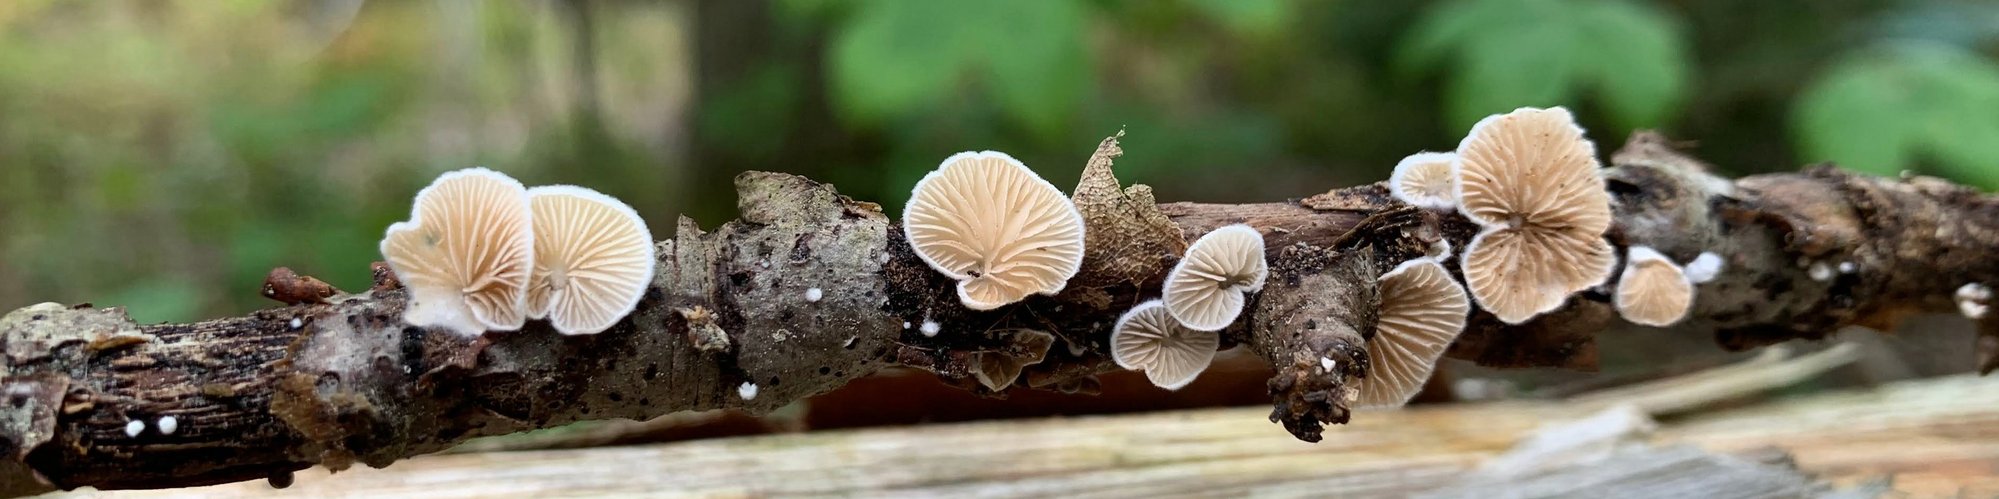 Interesting looking white-gilled mushrooms growing from a small stick, set against the backdrop of a lush forest.